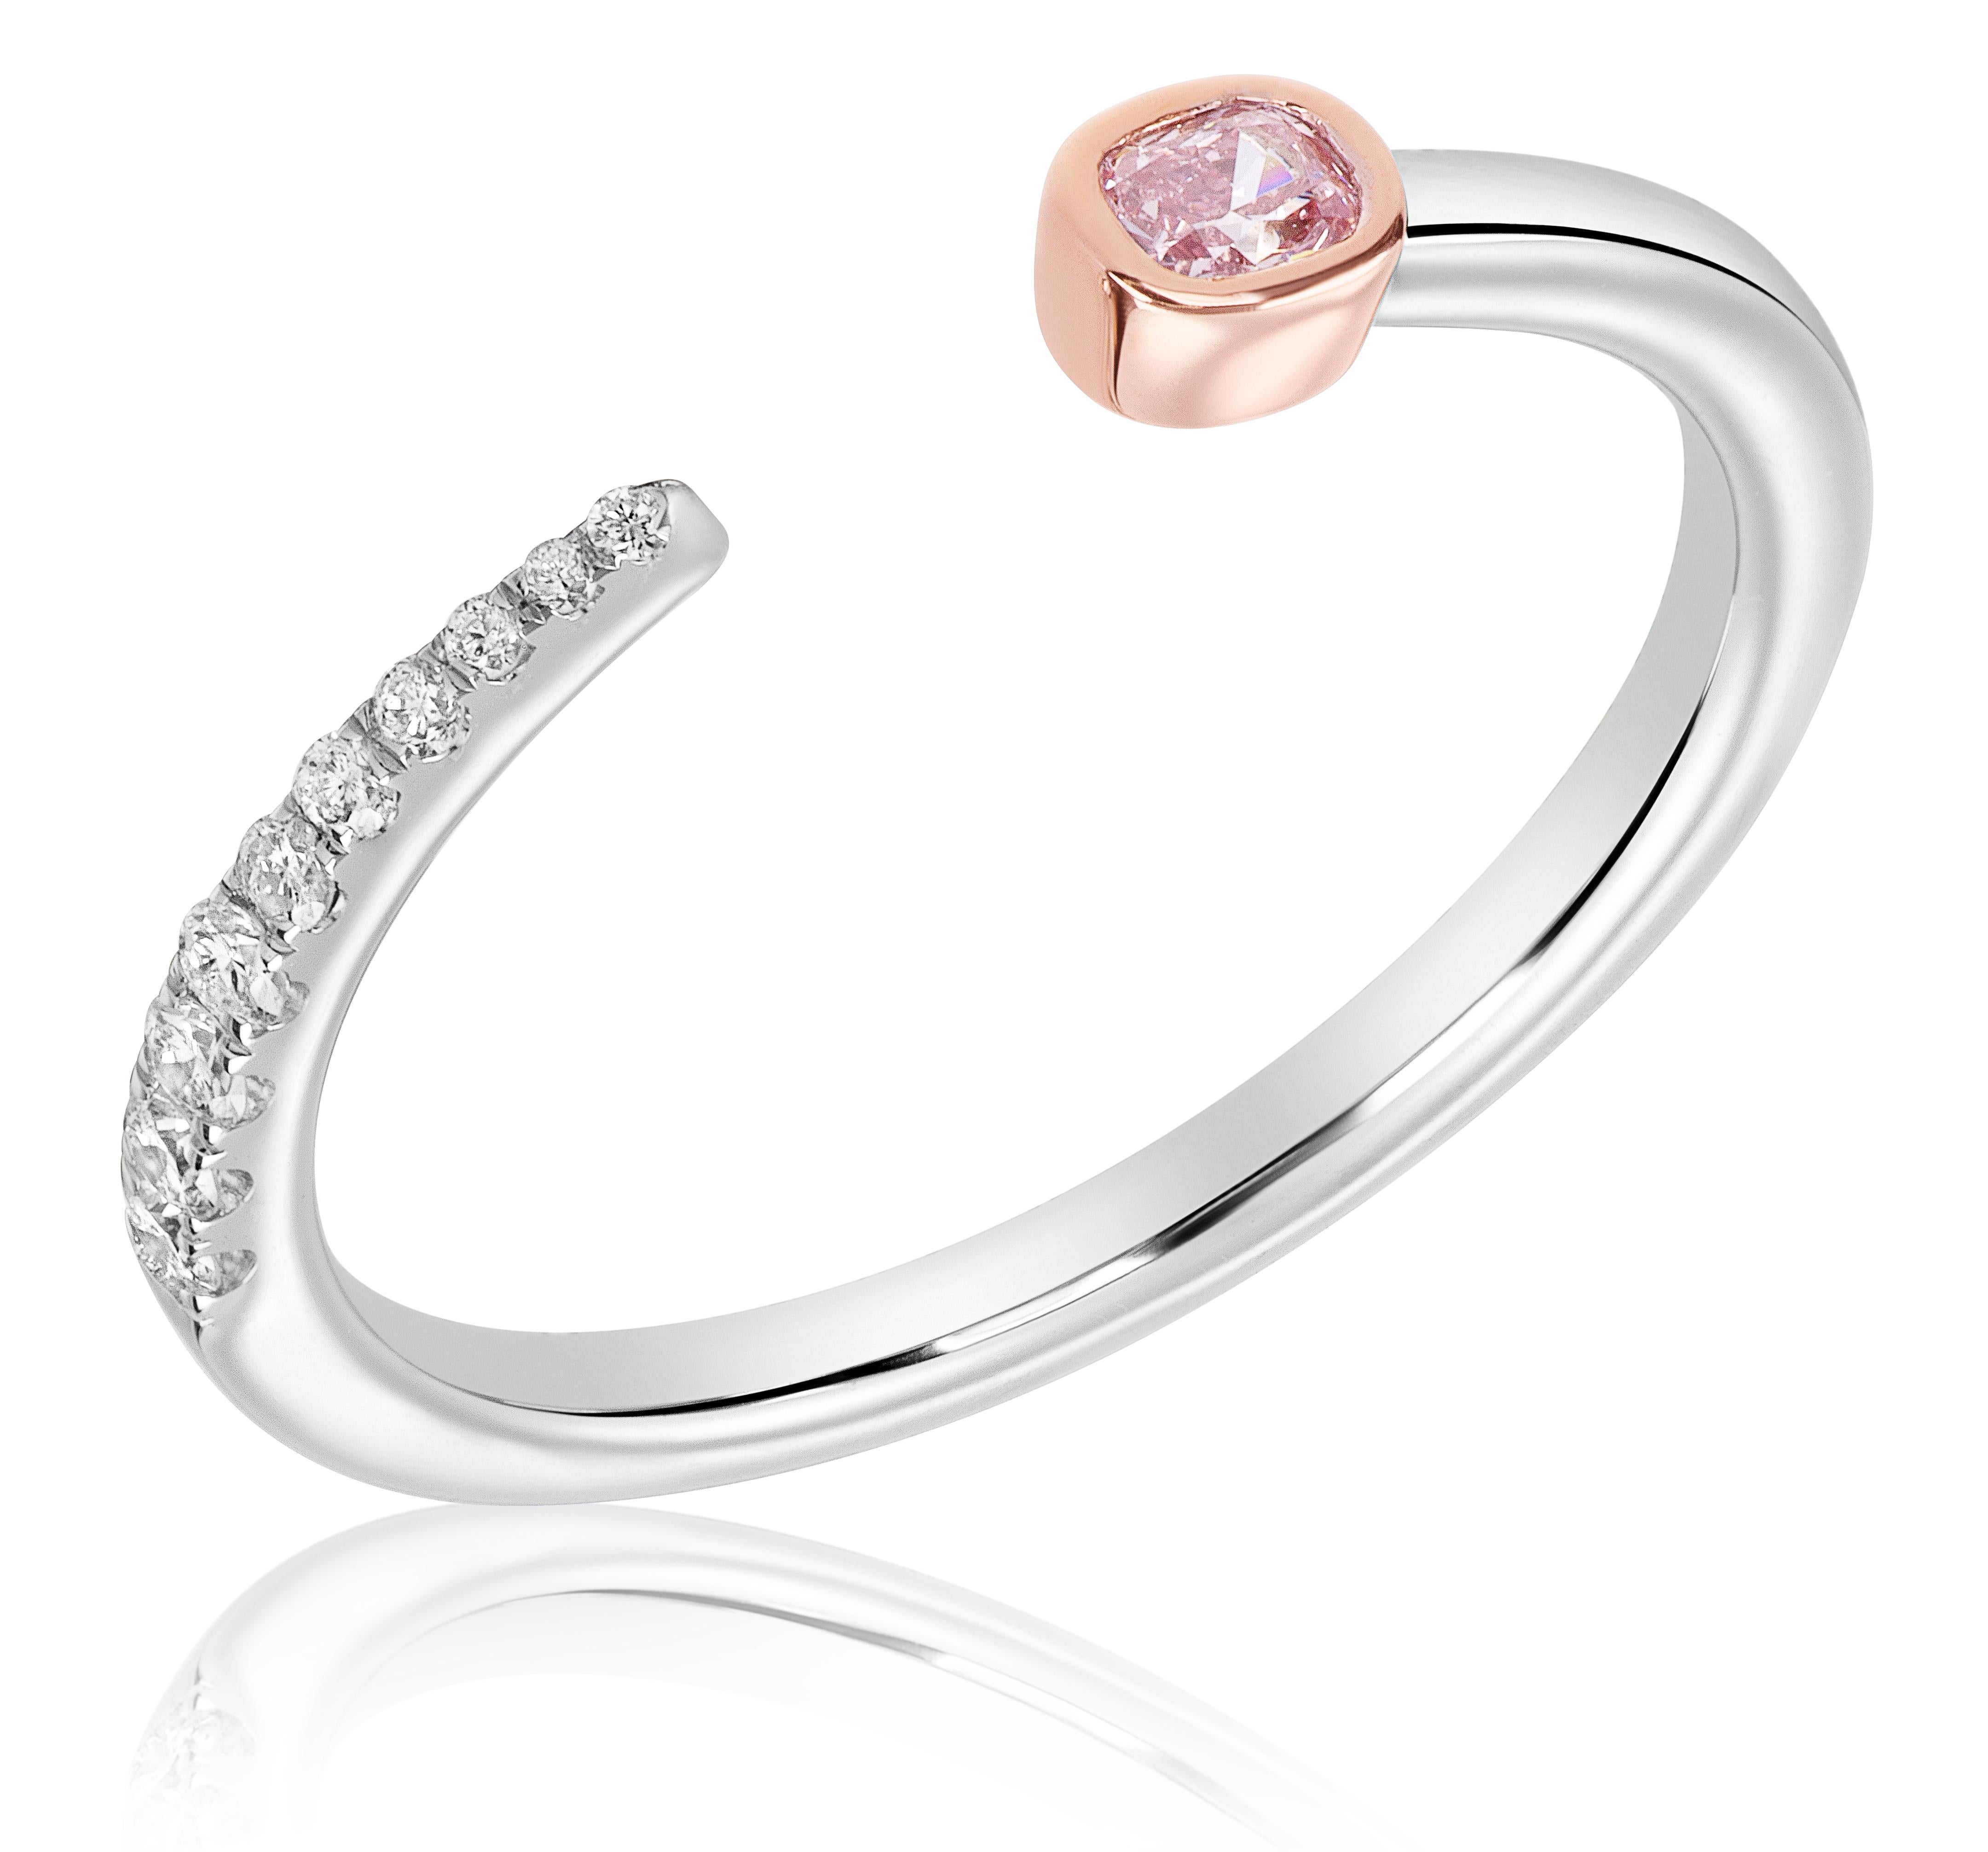 Ring (stackable) featuring a 0.08 carat Radiant, Intense Pink, GIA #2215437490. Accented with 8 white diamonds weighing .09 carats. Set in 14k rose and white gold. Stock size in 6.5, which can be altered based on sale. 